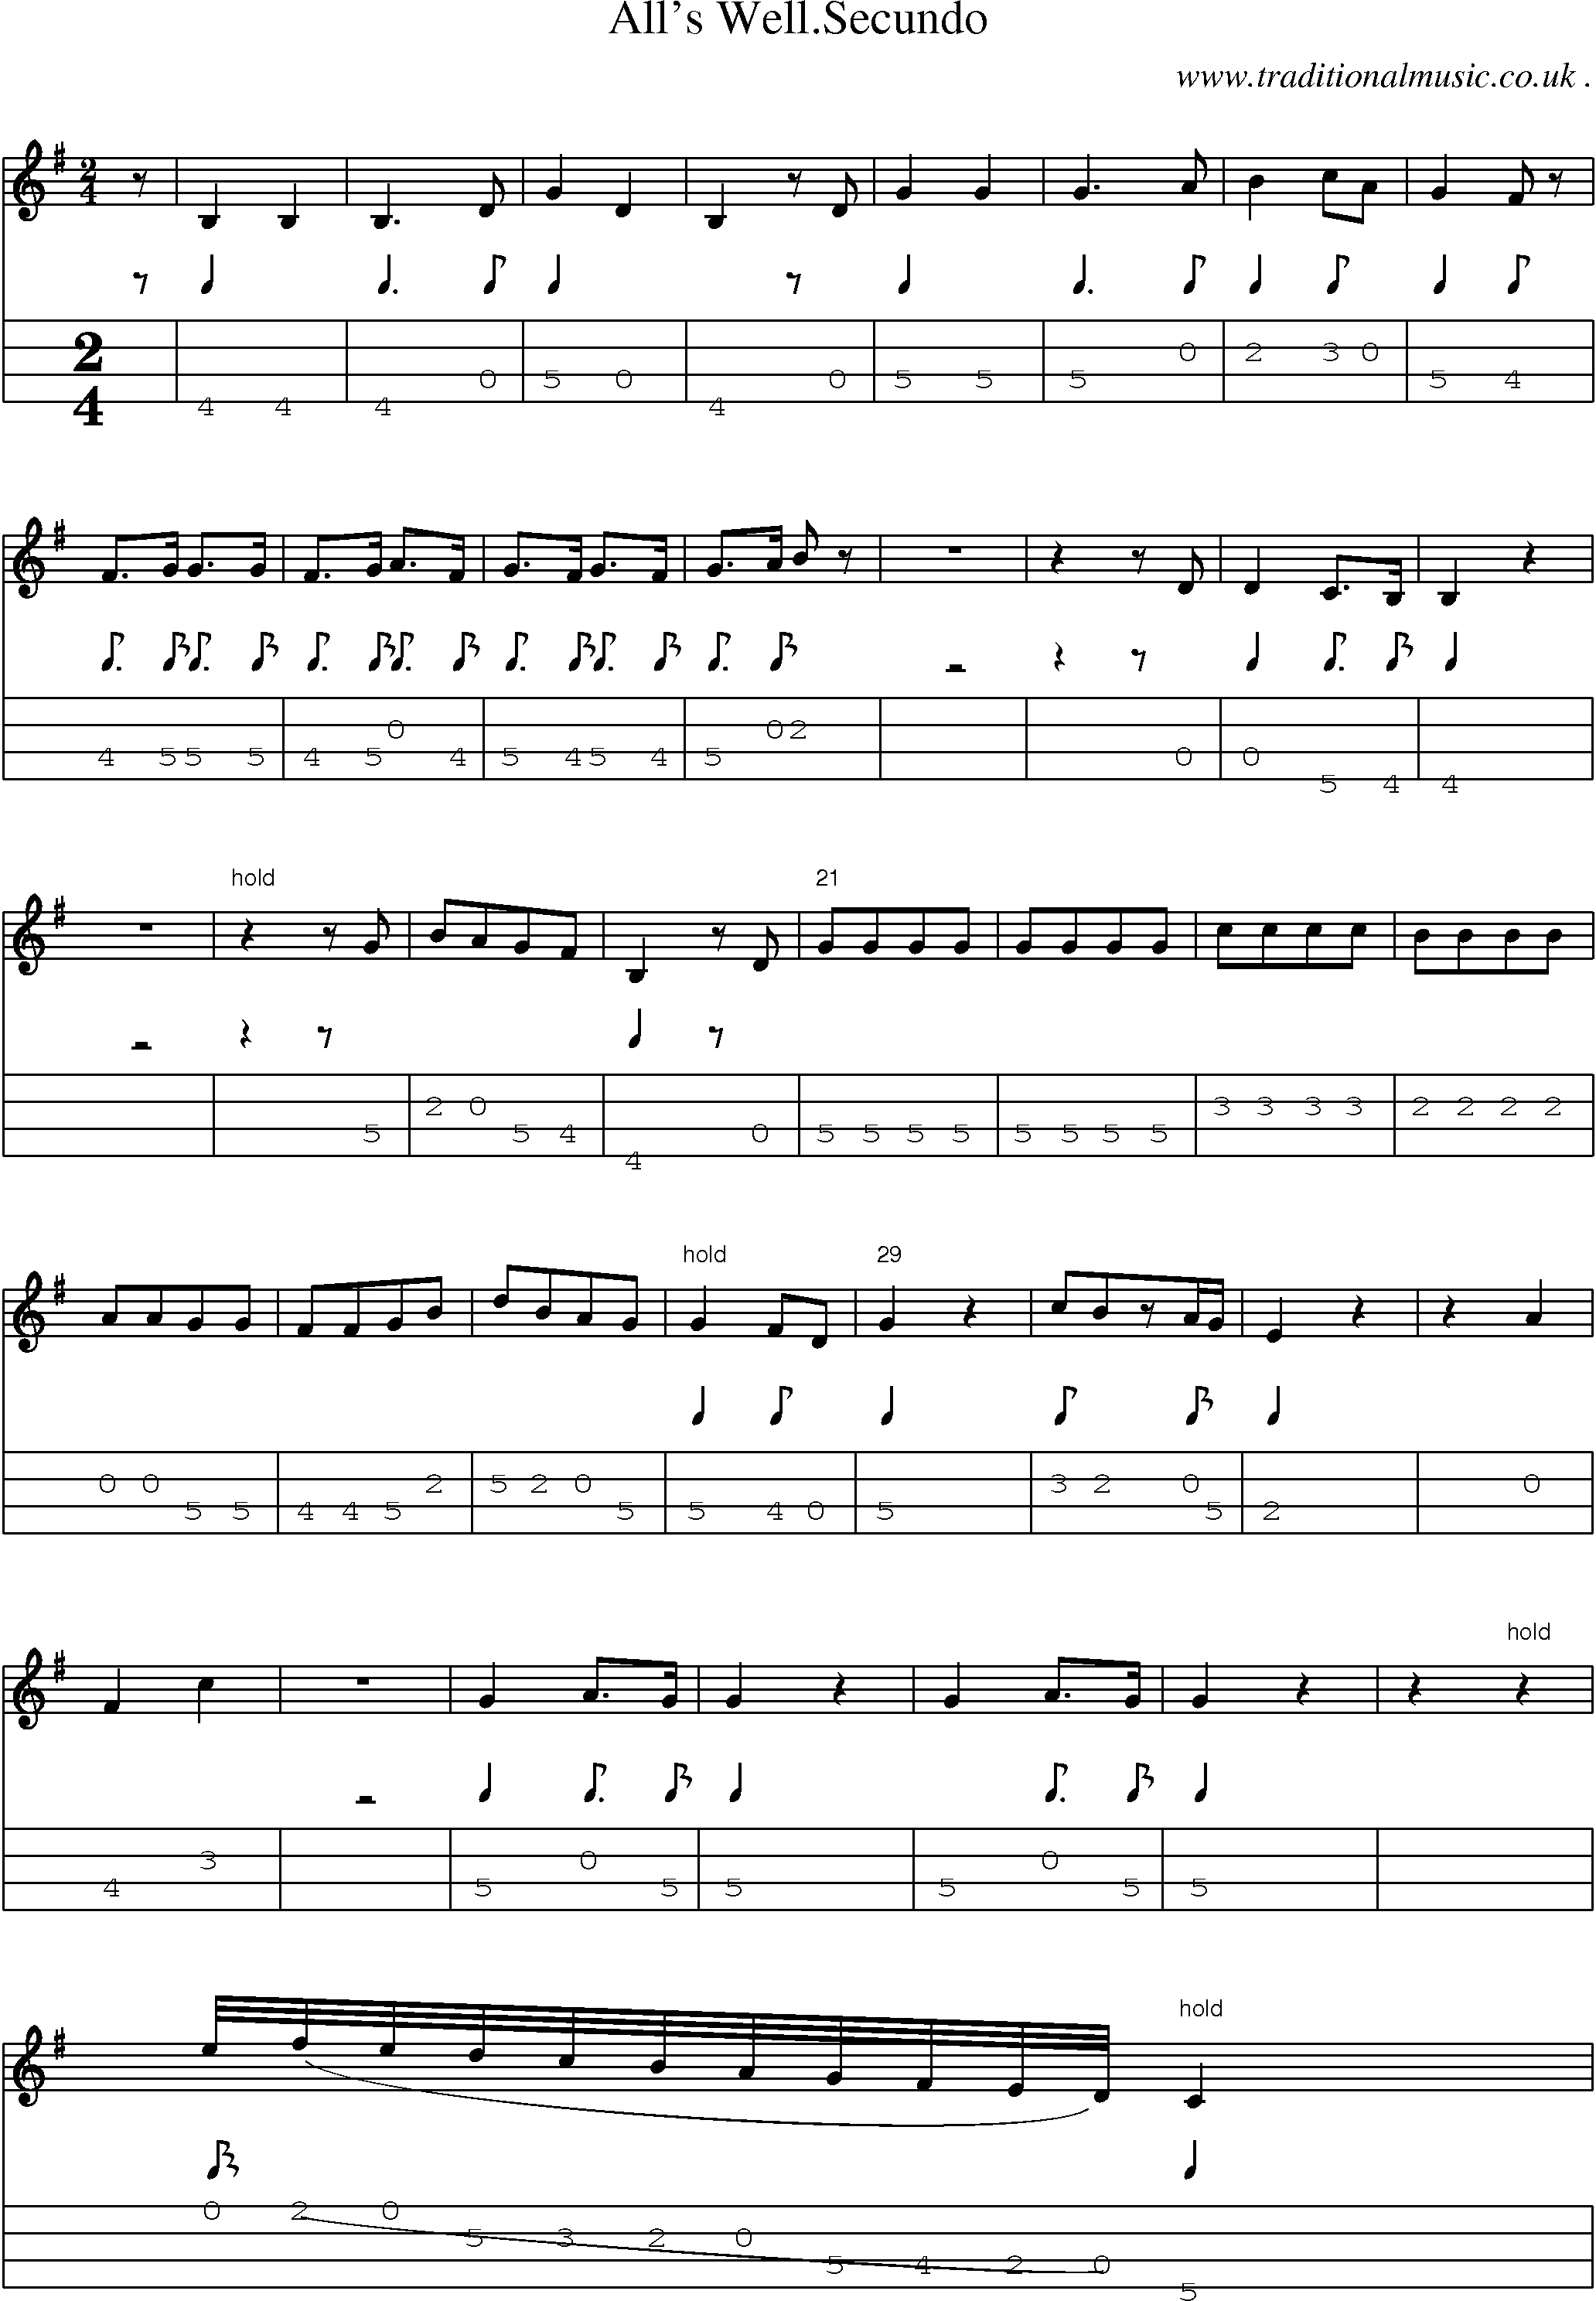 Sheet-Music and Mandolin Tabs for Alls Wellsecundo